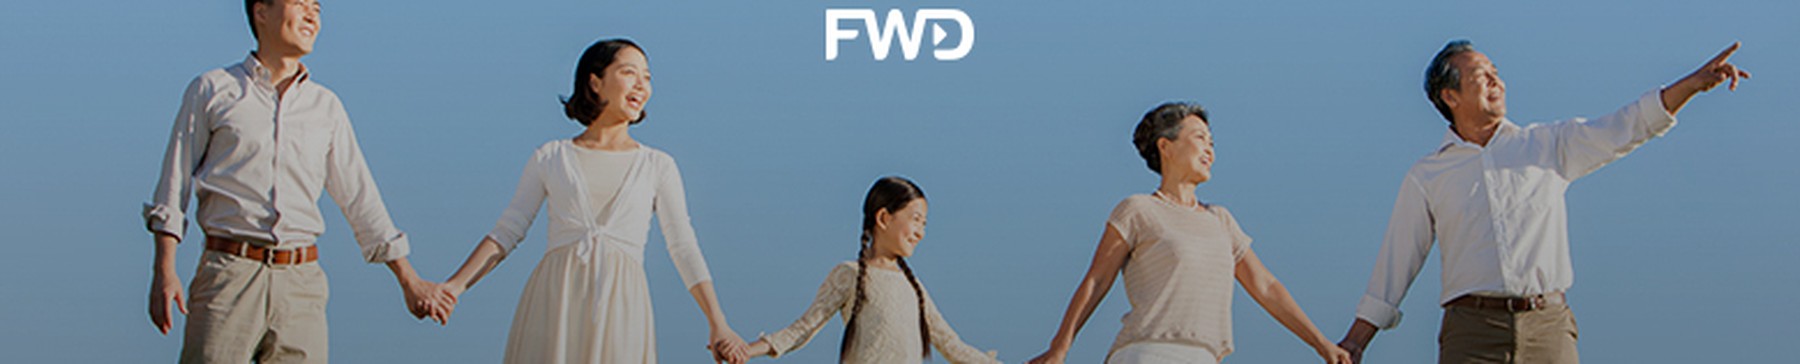 Save up to 35% on insurance at FWD